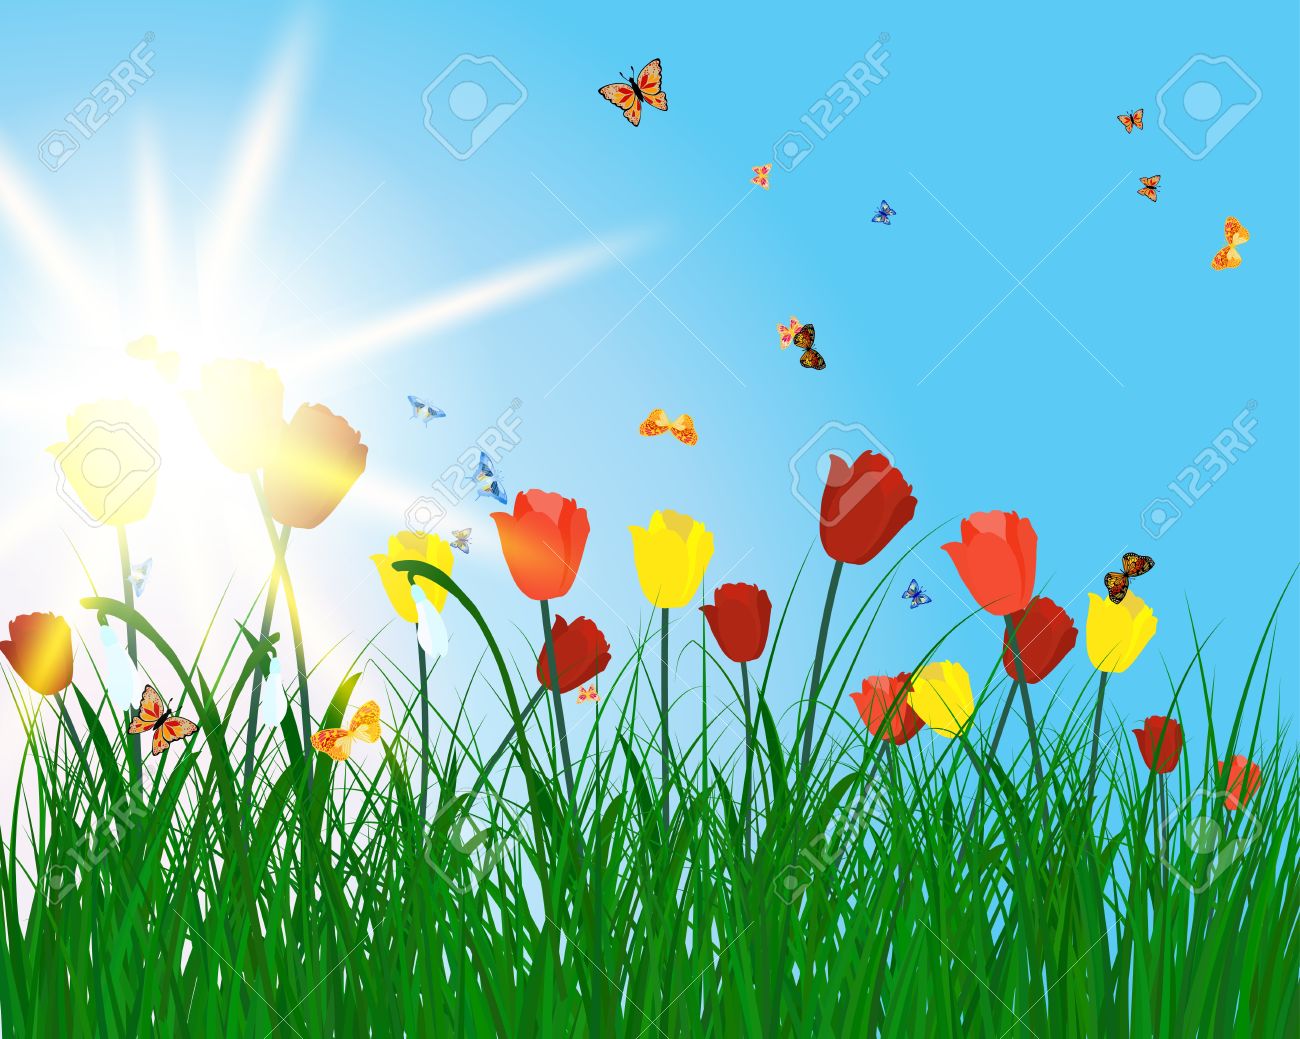 flower meadow clipart - photo #30